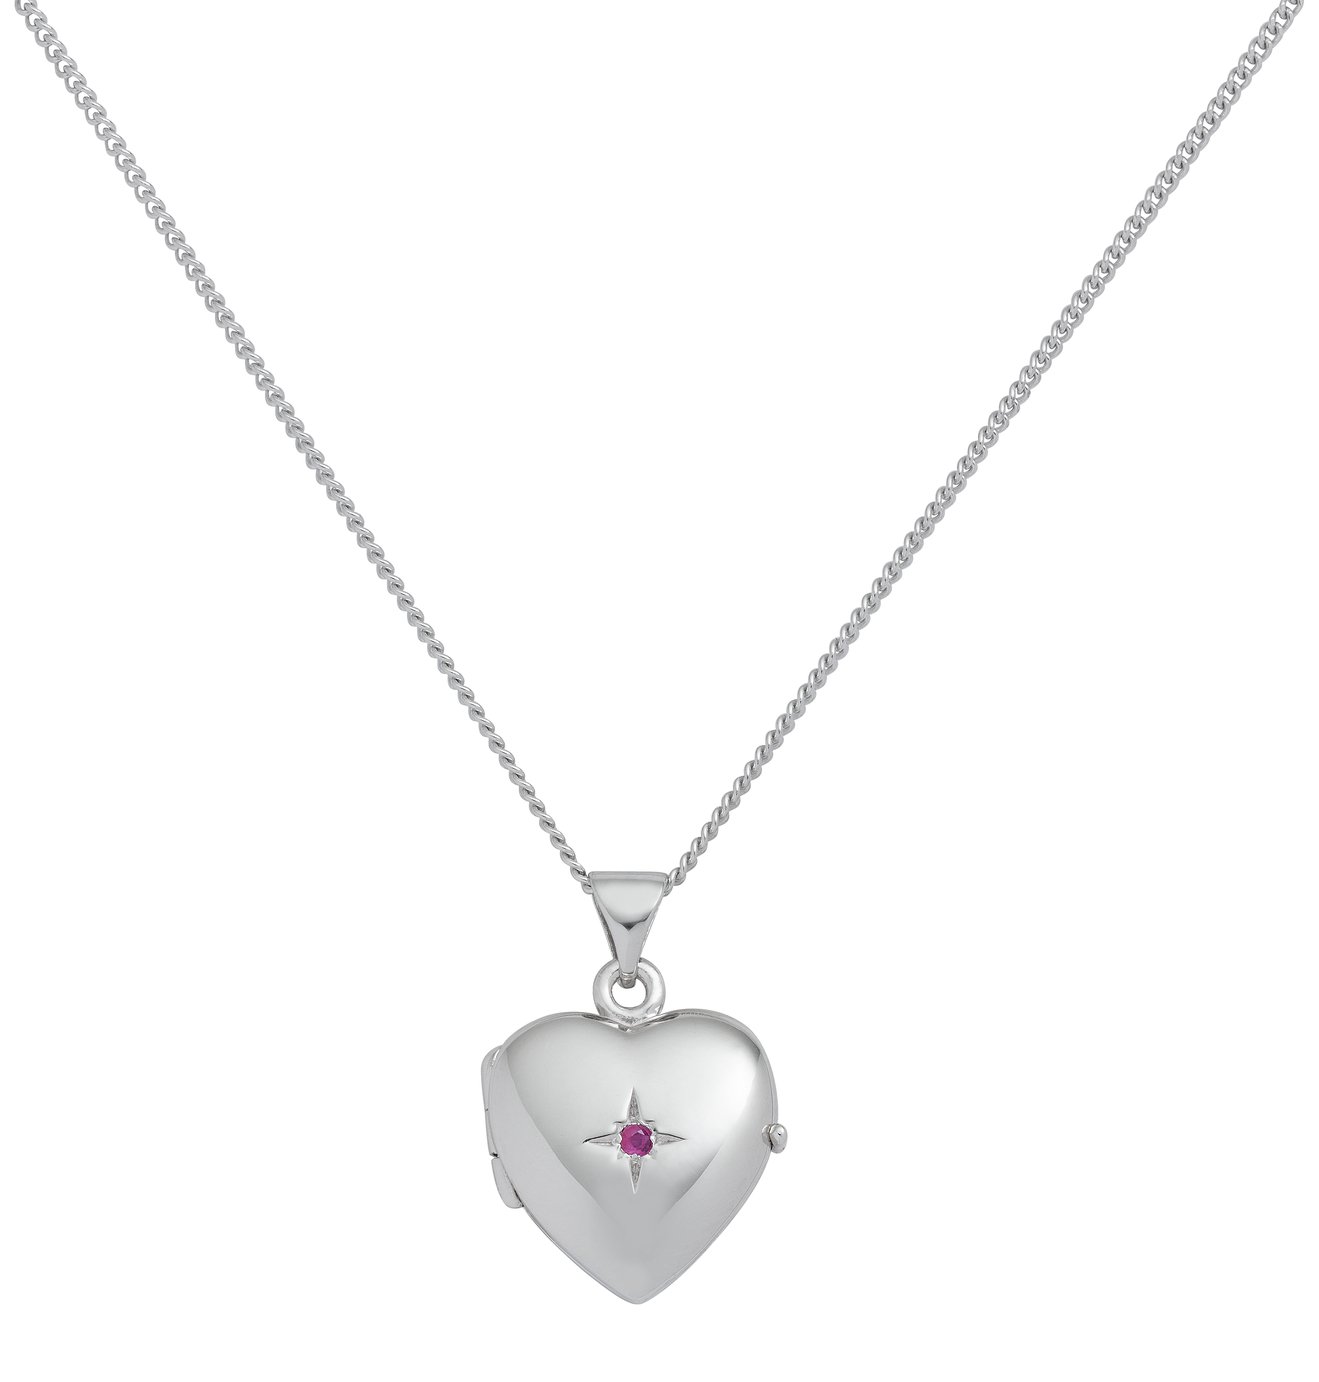 Revere Sterling Silver Birthstone Pendant Necklace - Ruby